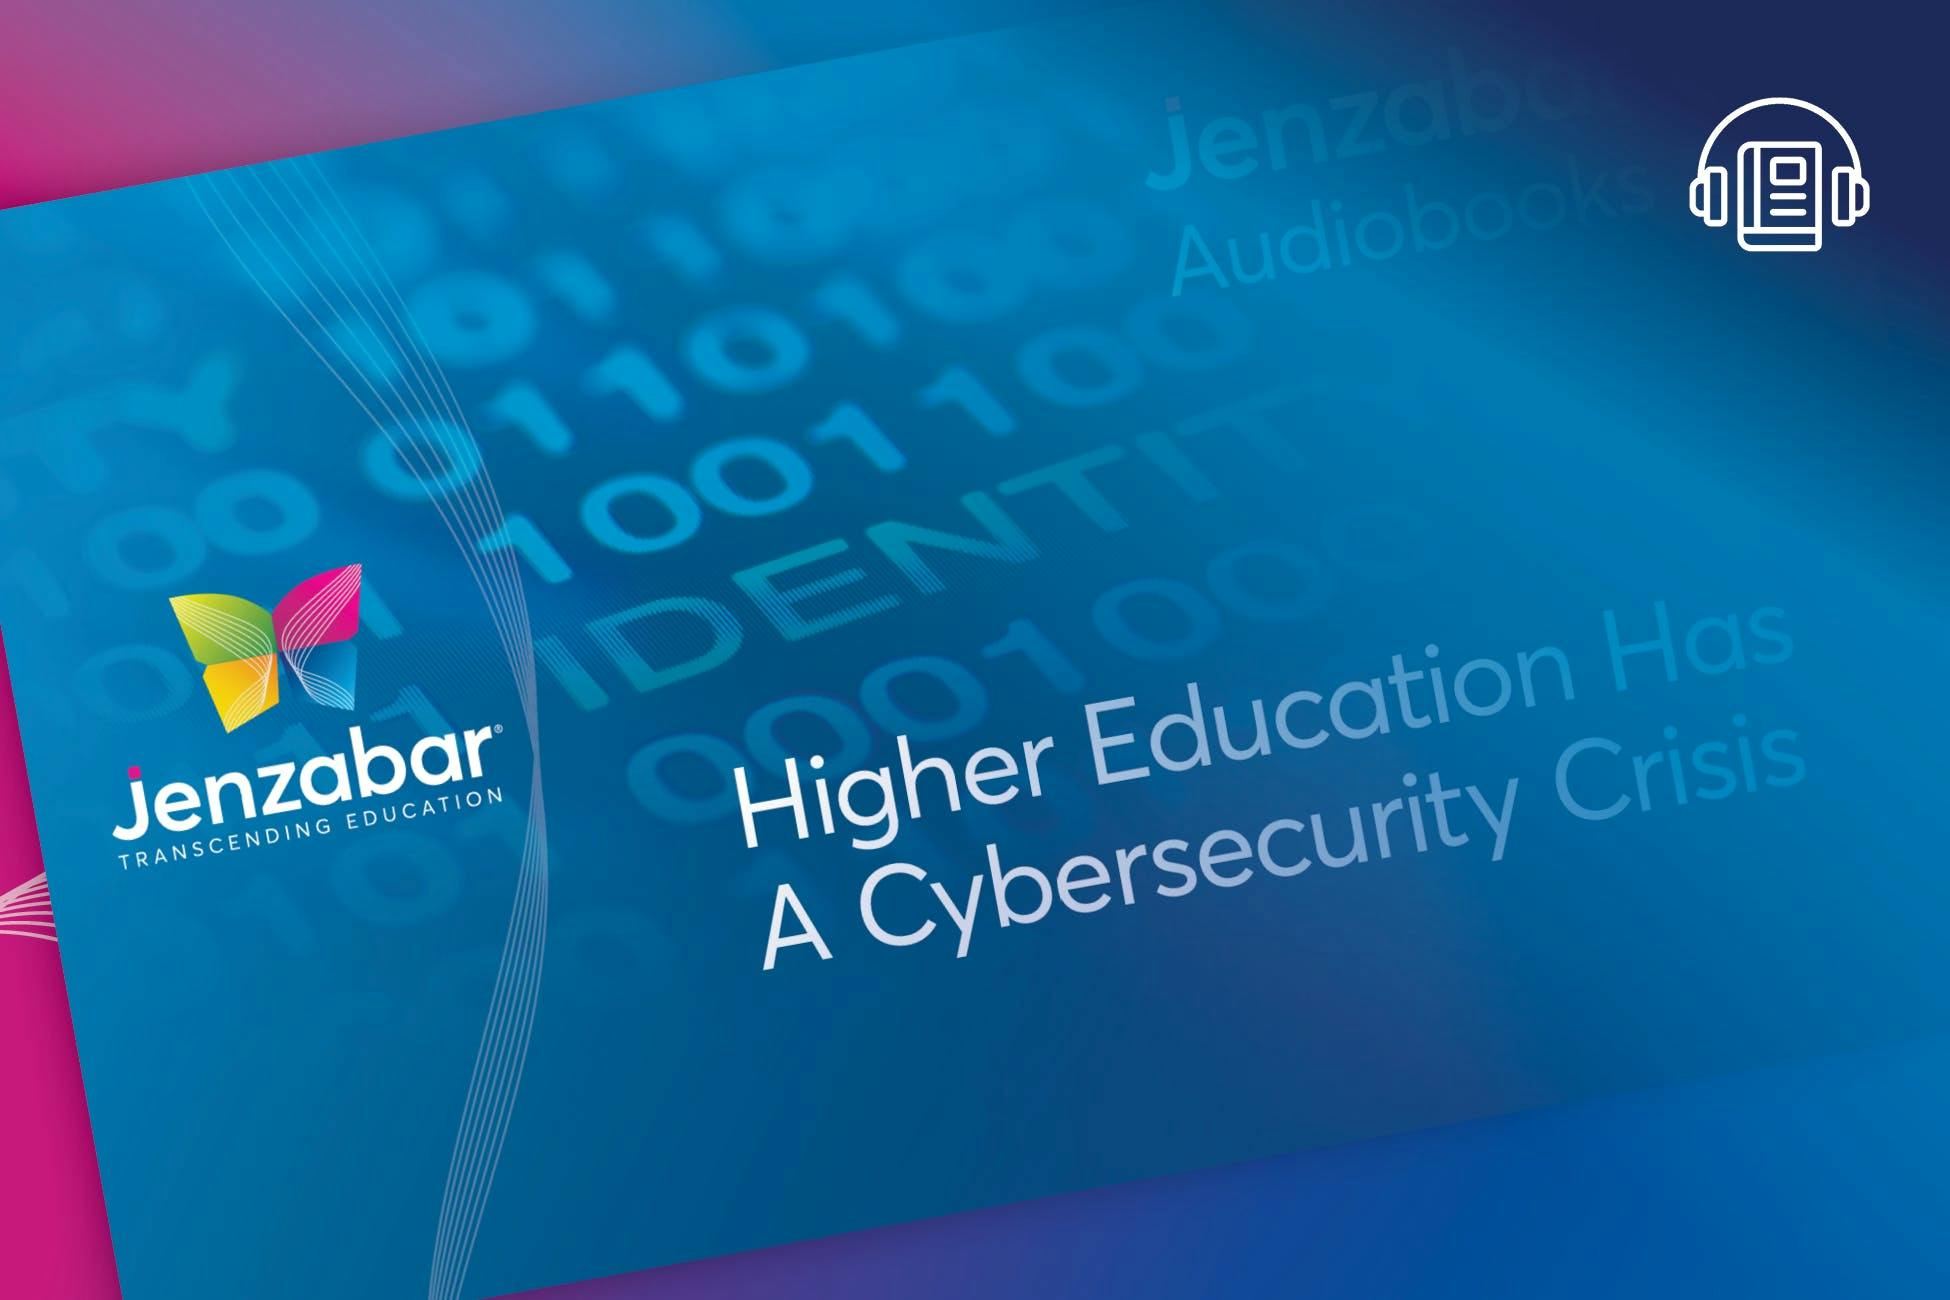 Audiobook: Higher Education Has a Cybersecurity Crisis. Here’s How to Address It.